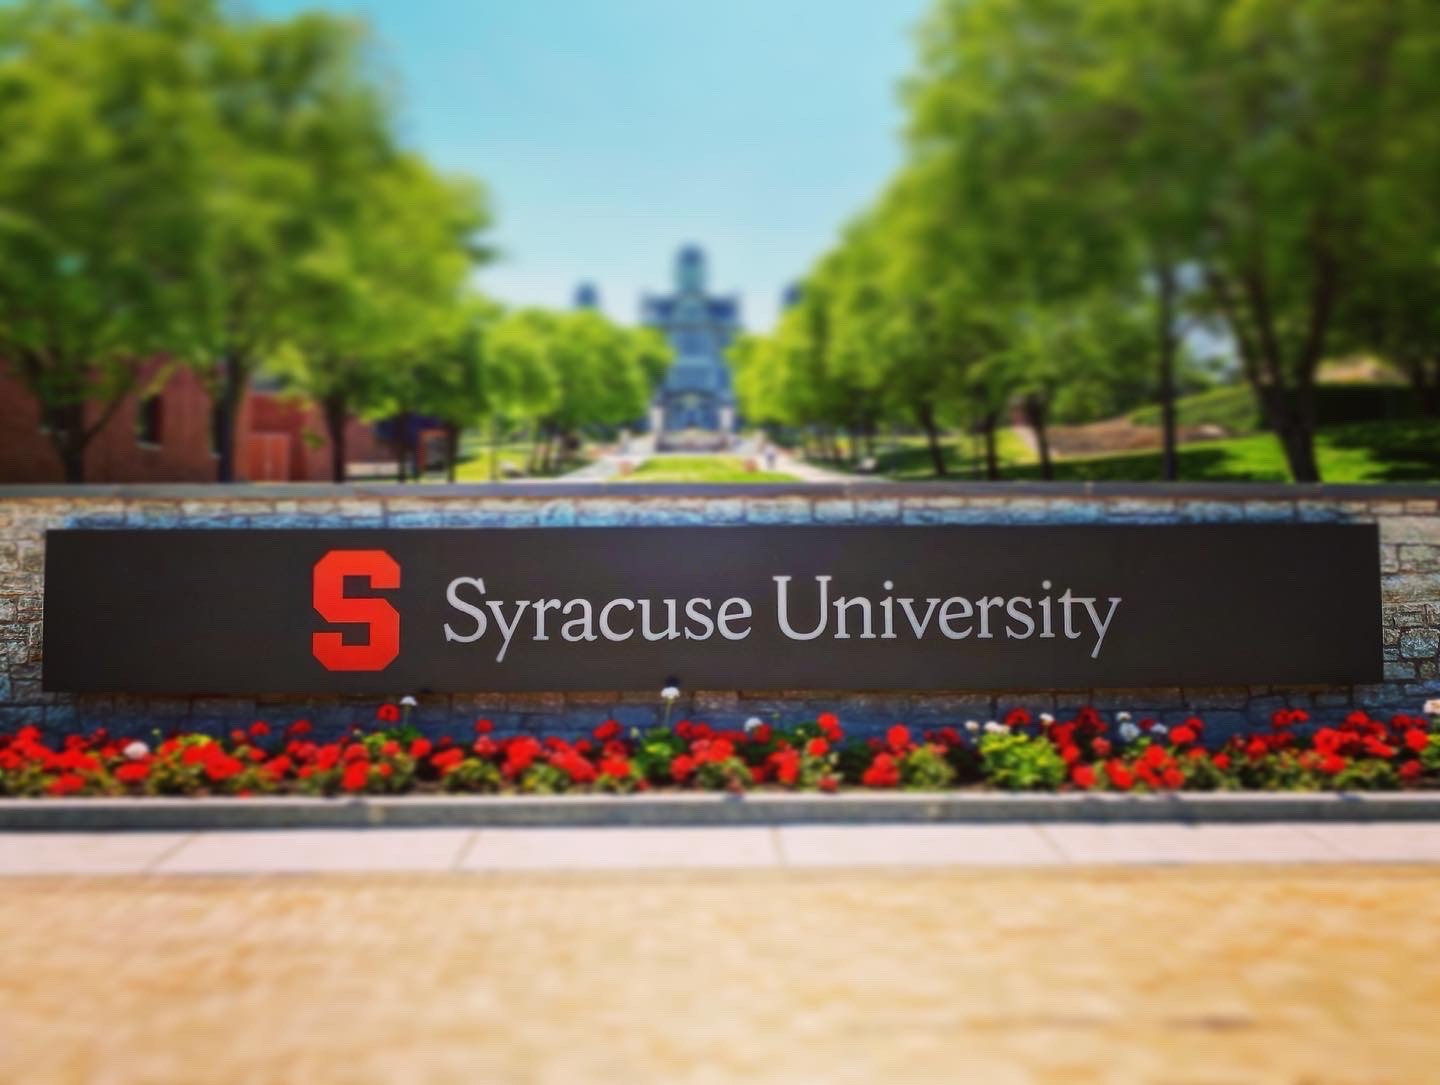 Syracuse University sign with red flowers in front of it and trees in the background.